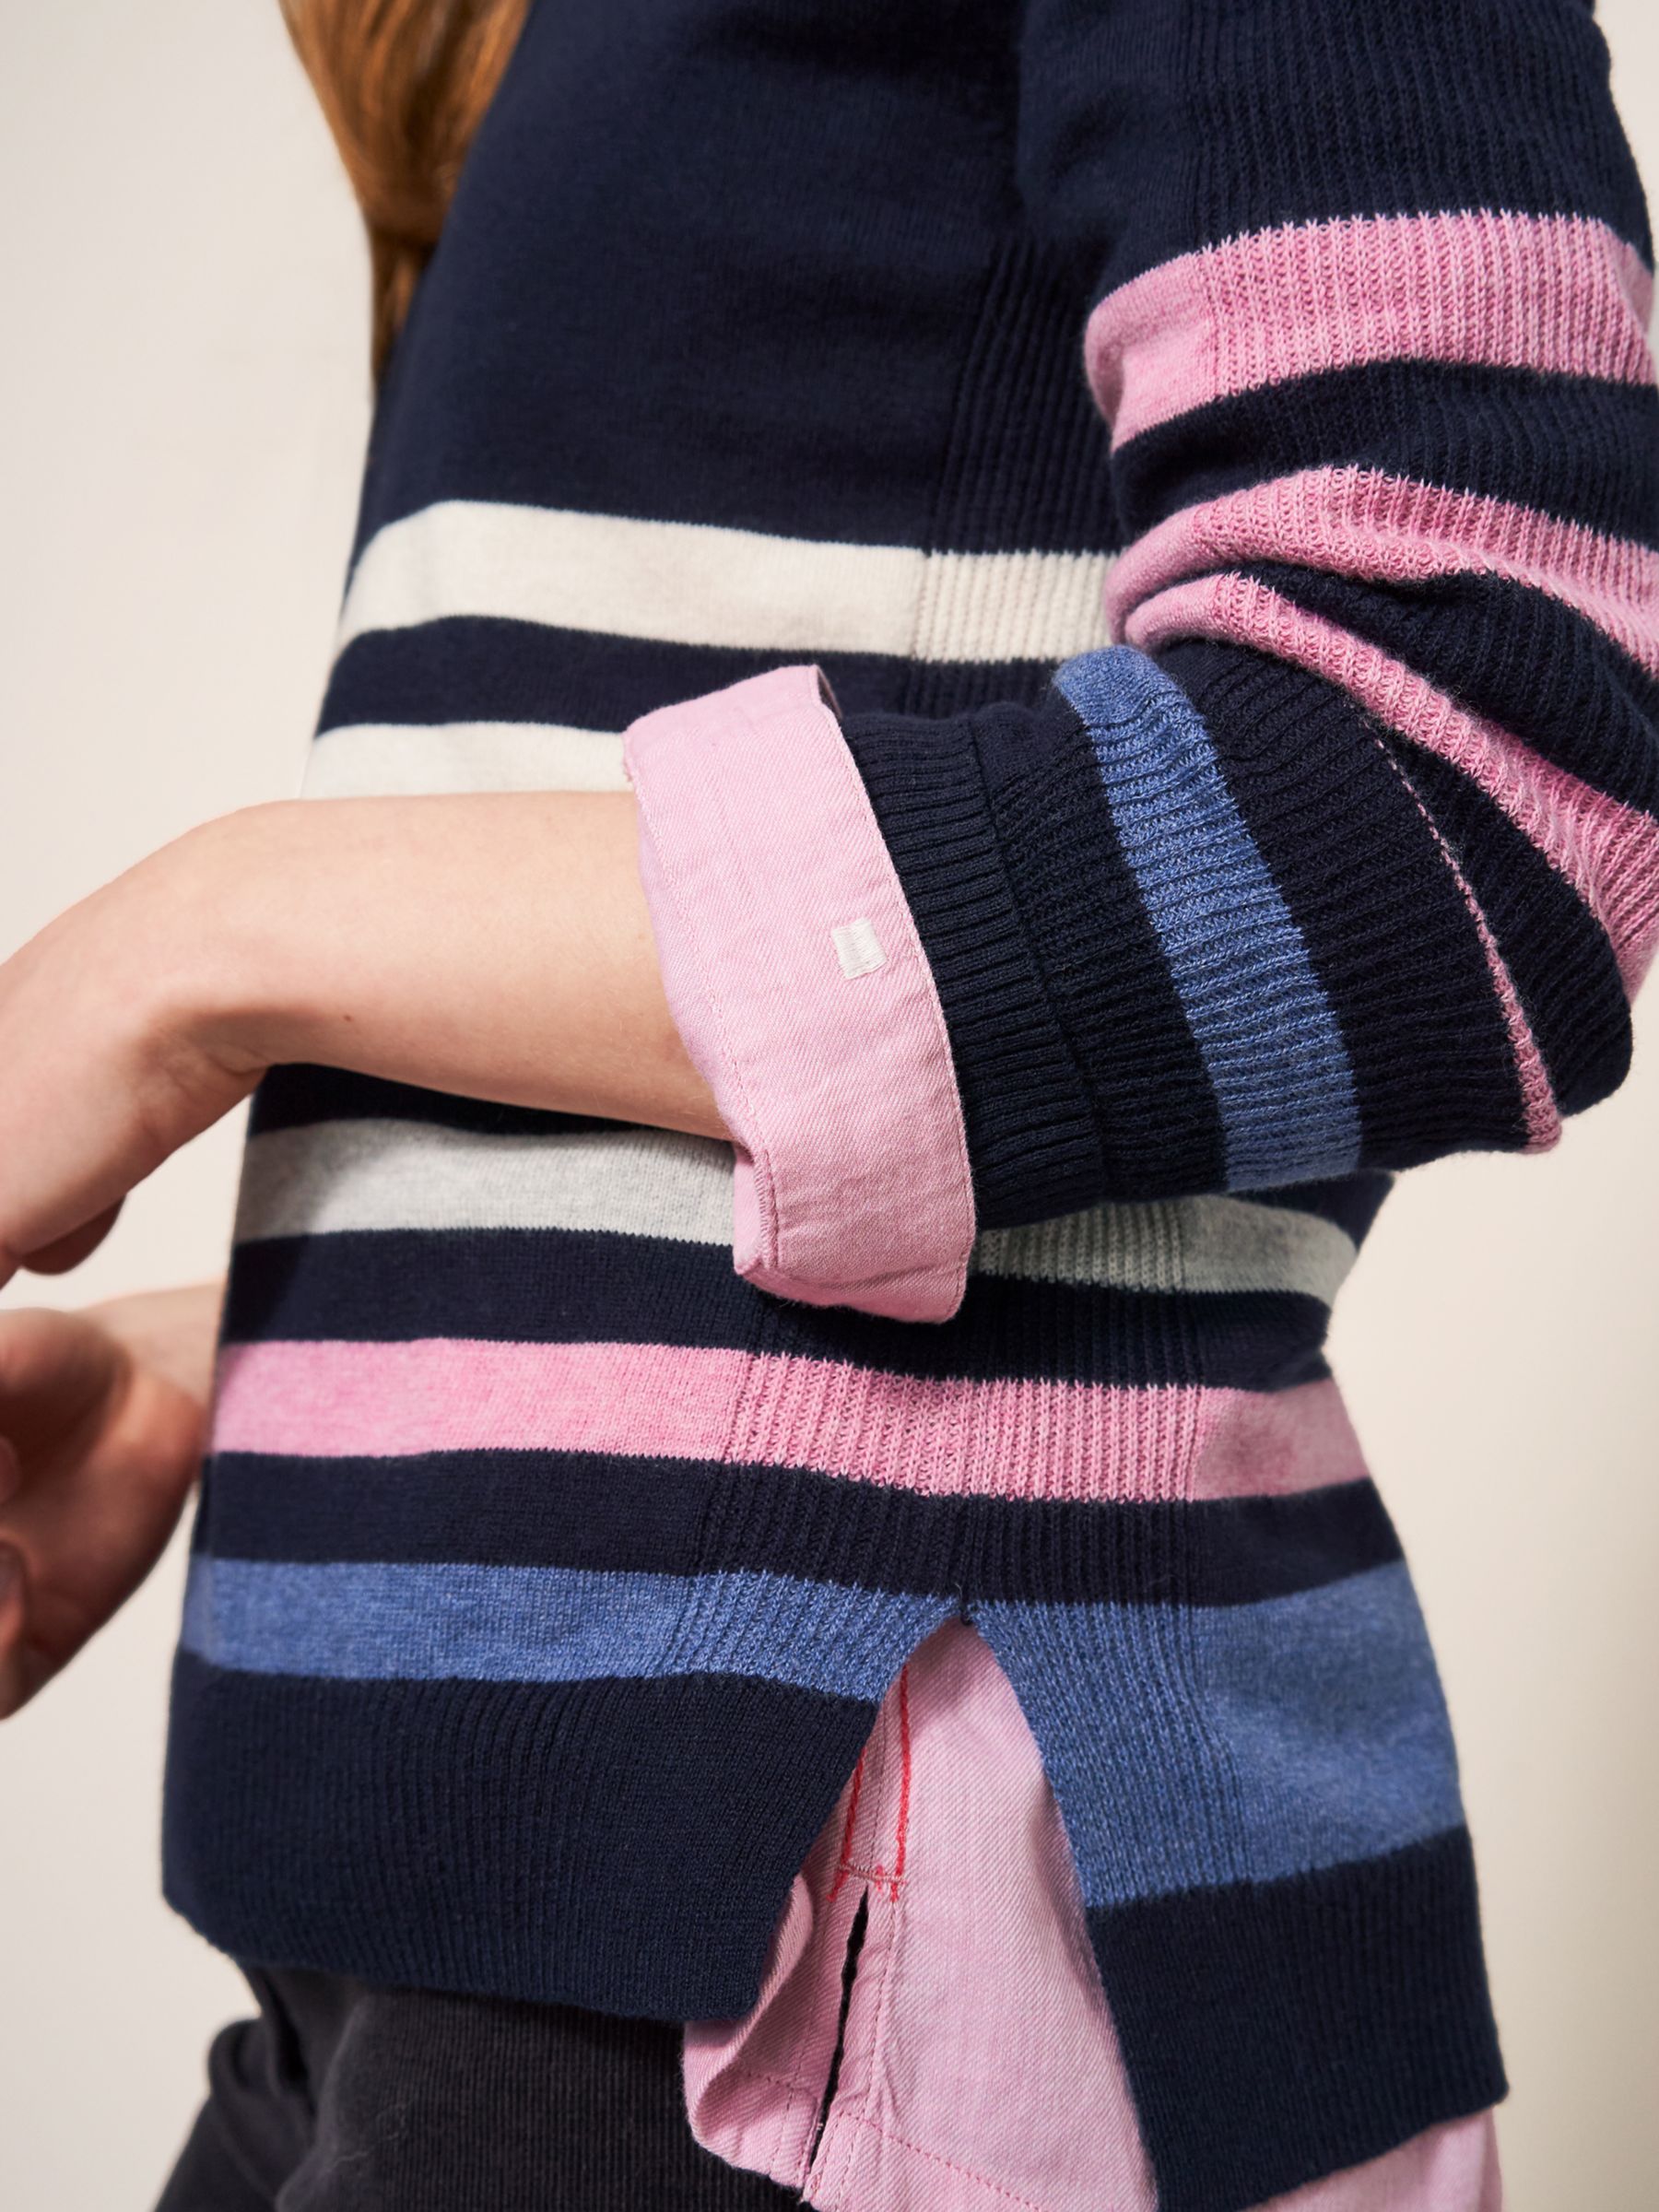 What to look for in shapewear - Pink and Navy StripesPink and Navy  Stripes